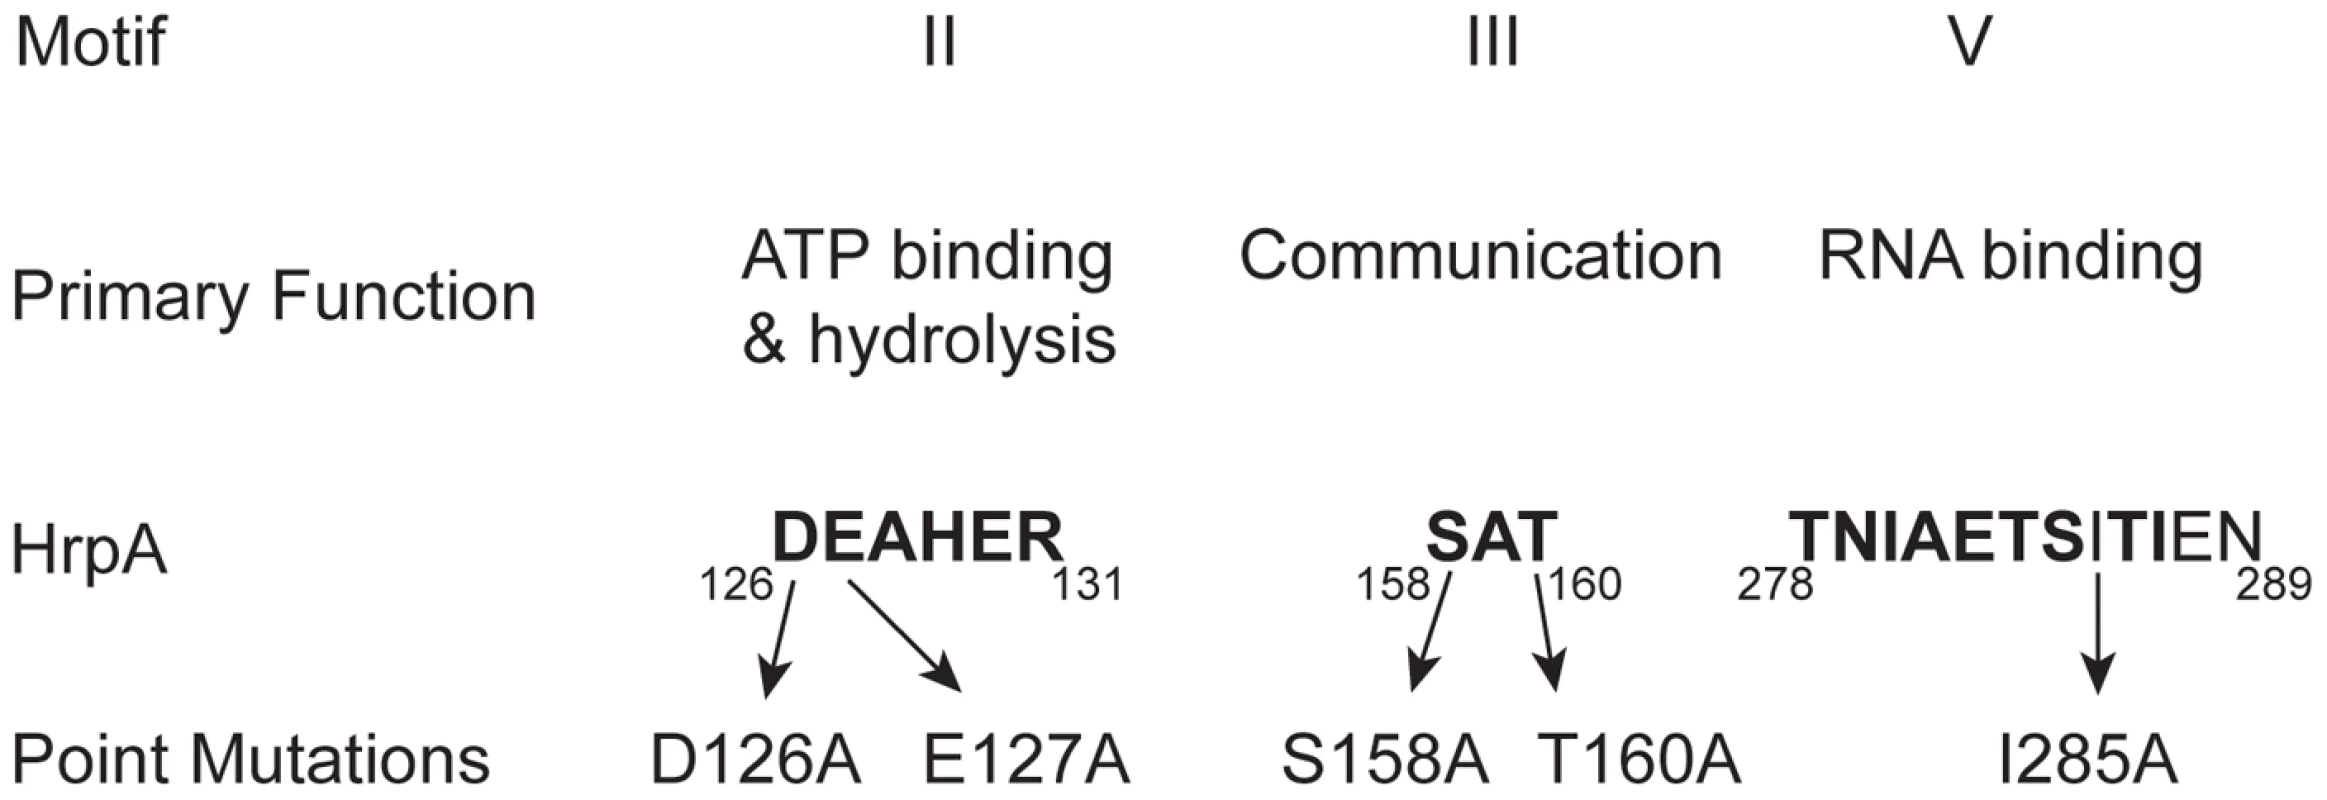 Conserved DEAH-box RNA helicase motifs in the <i>B. burgdorferi</i> HrpA protein used for point mutations.